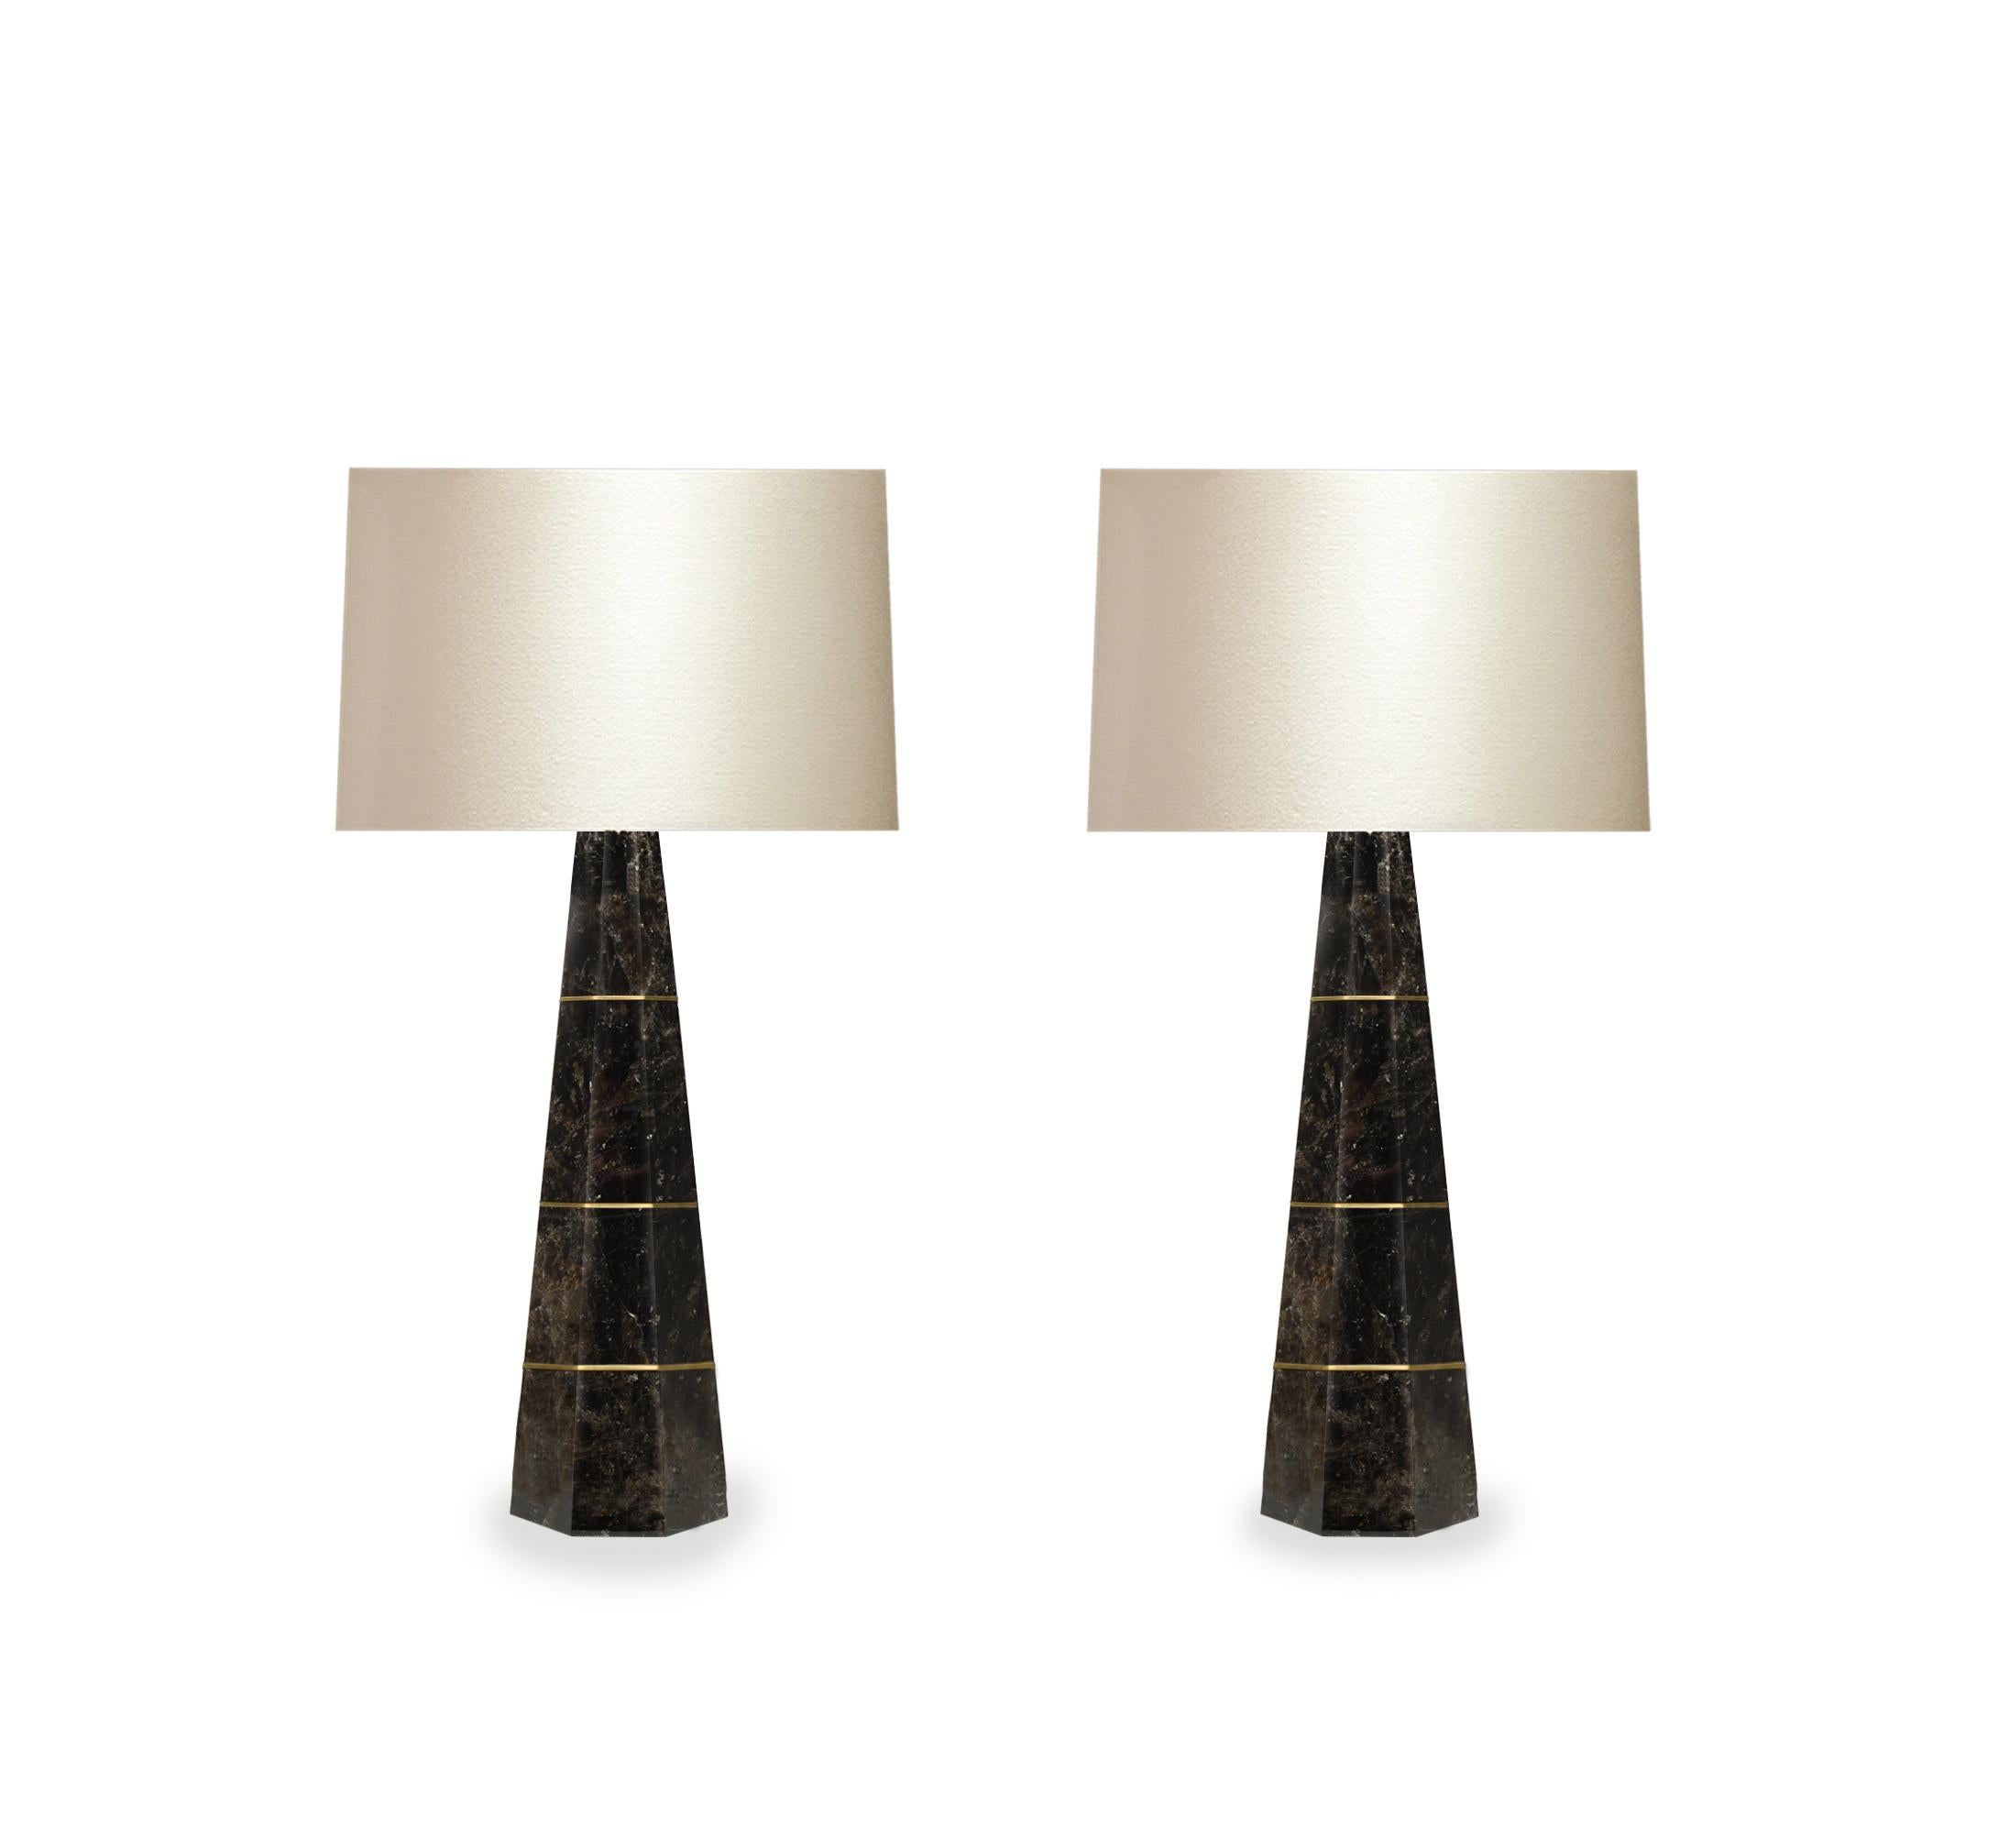 Pair of column smoky rock crystal quartz lamps with polished brass decoration. Created by Phoenix Gallery, NYC.
Measure: To the top of rock crystal: 21.5